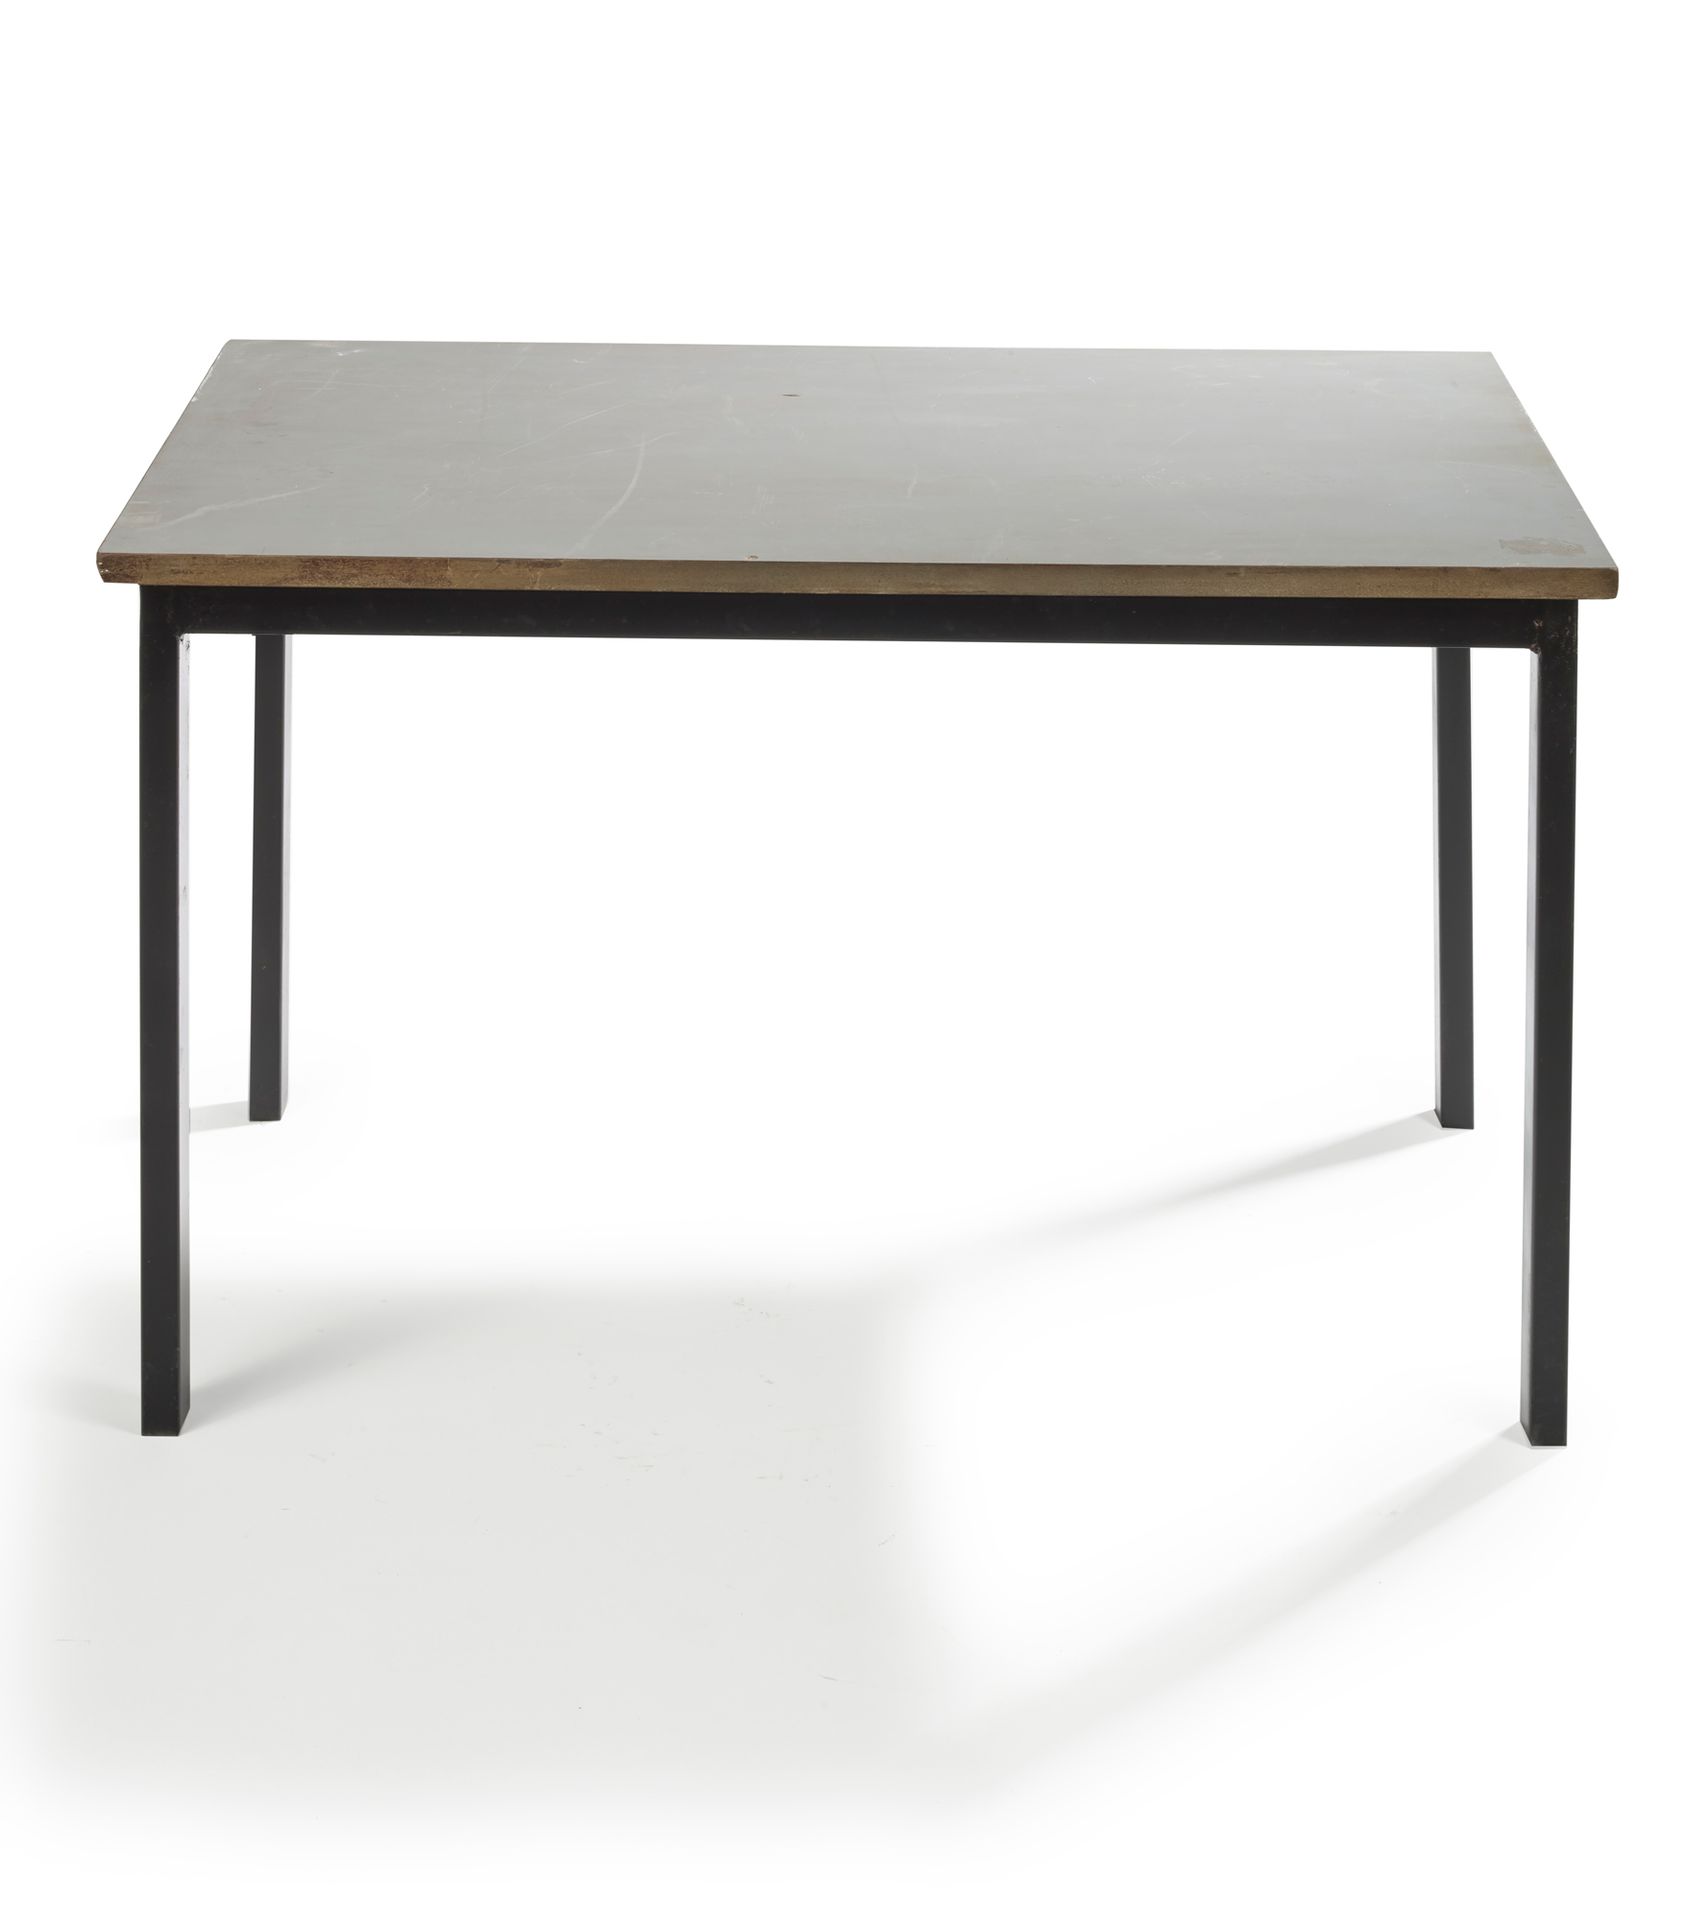 Charlotte PERRIAND (1903-1999) 
"Cansado" desk with rectangular top in beige lac&hellip;